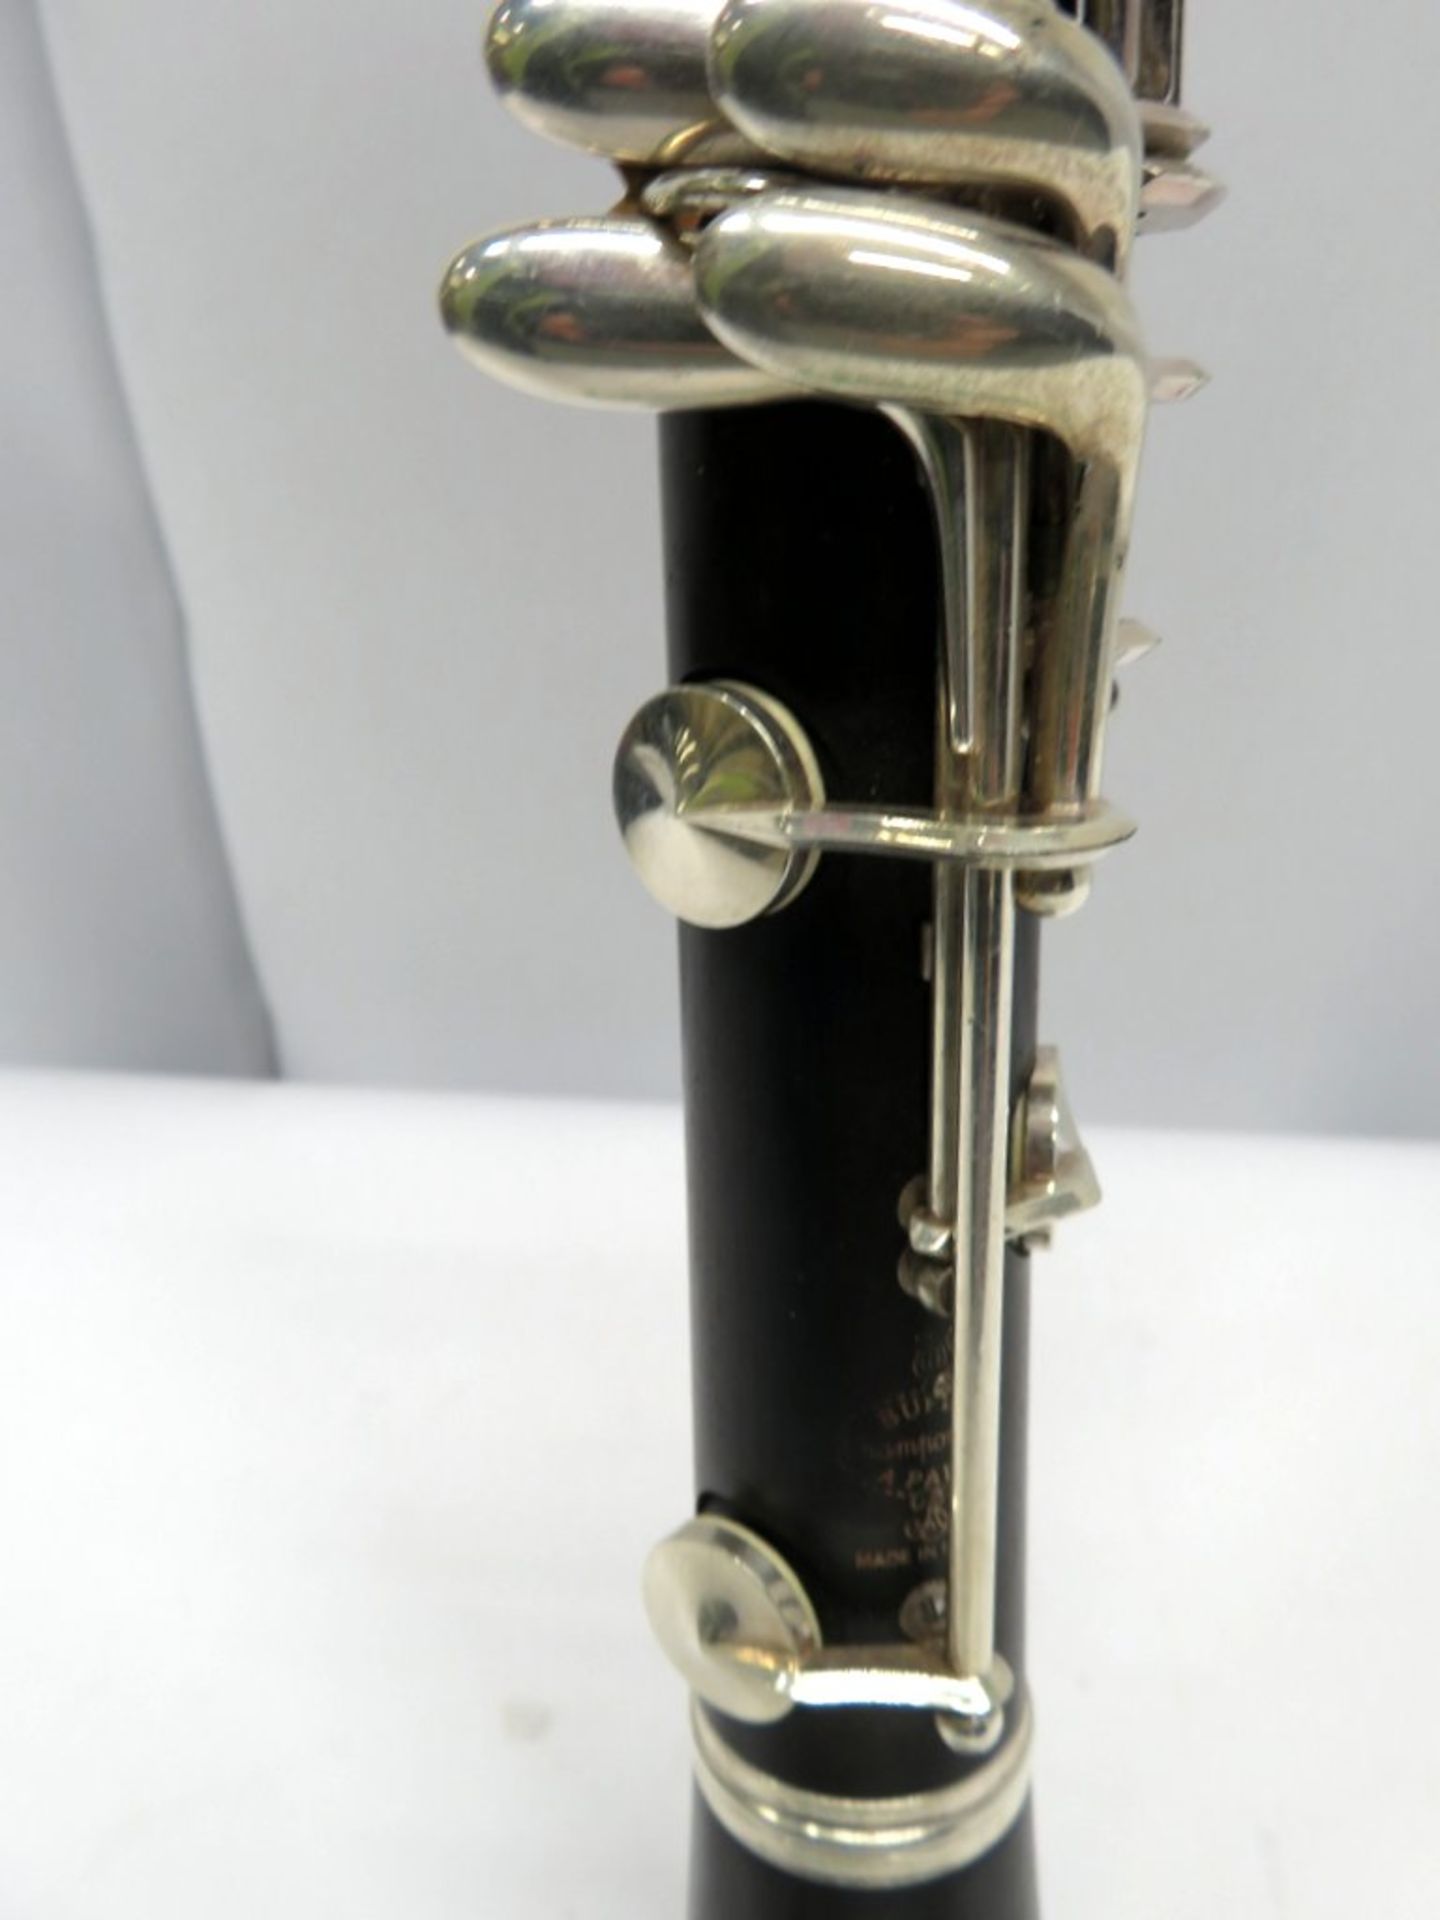 Buffet Crampon Clarinet Complete With Case. - Image 10 of 13